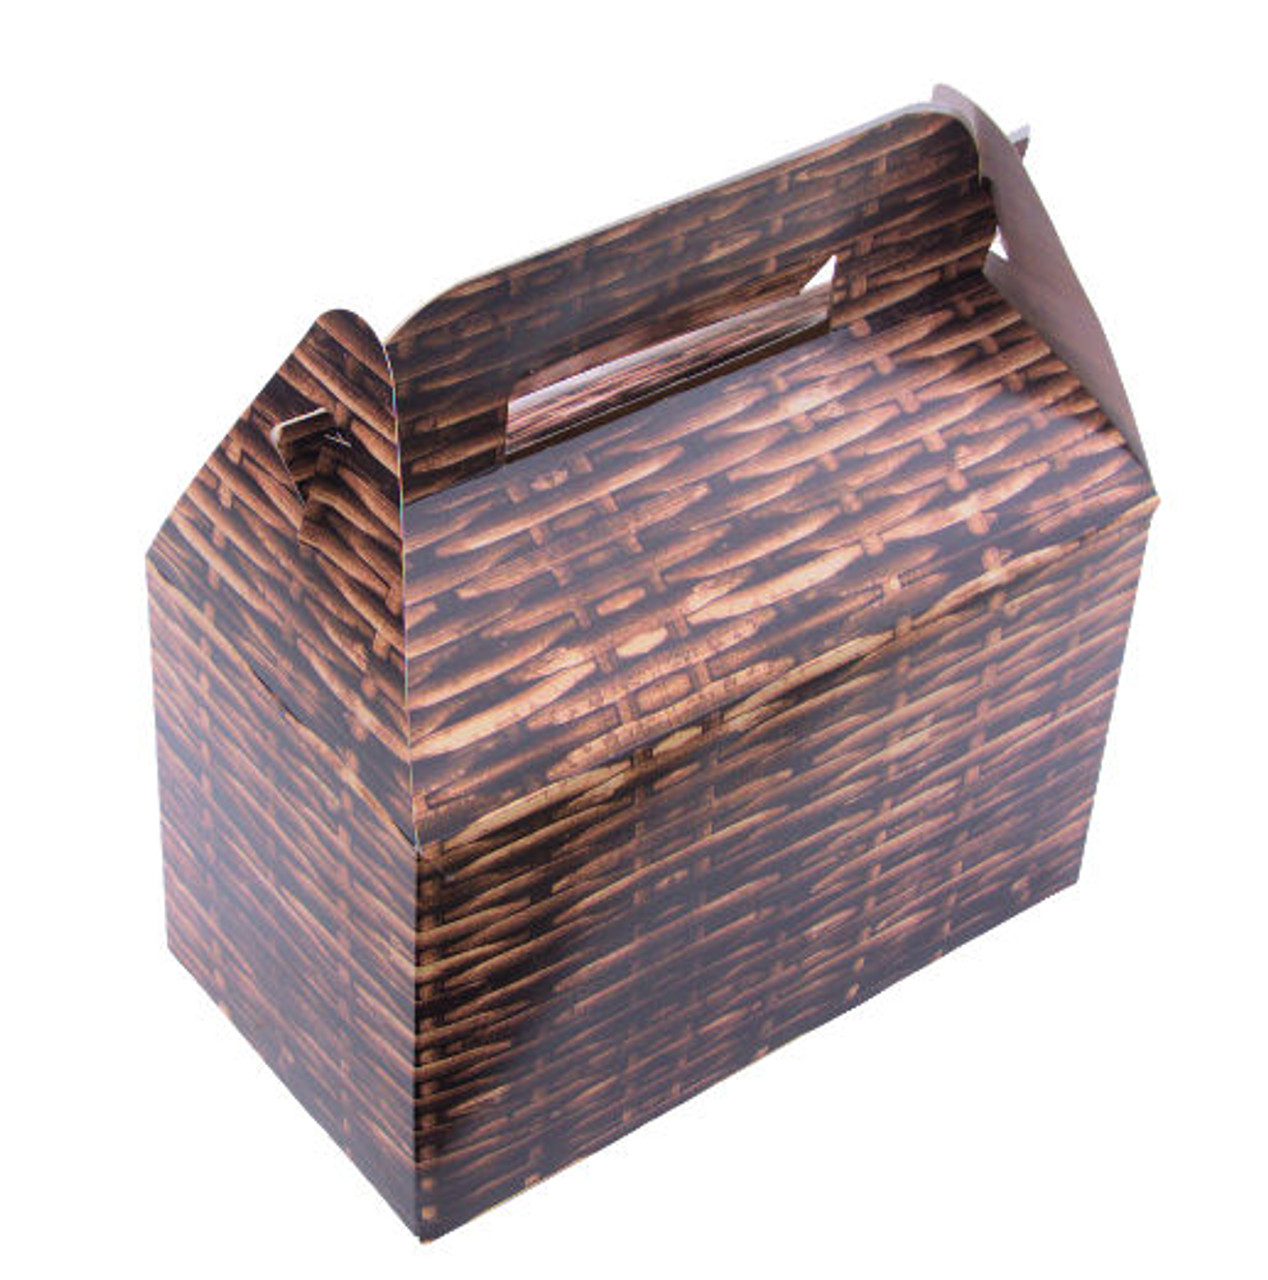 Pack of 50 Food Carry Picnic / Takeaway boxes  WICKER DESIGN includes Sandwich / Cake boxes,